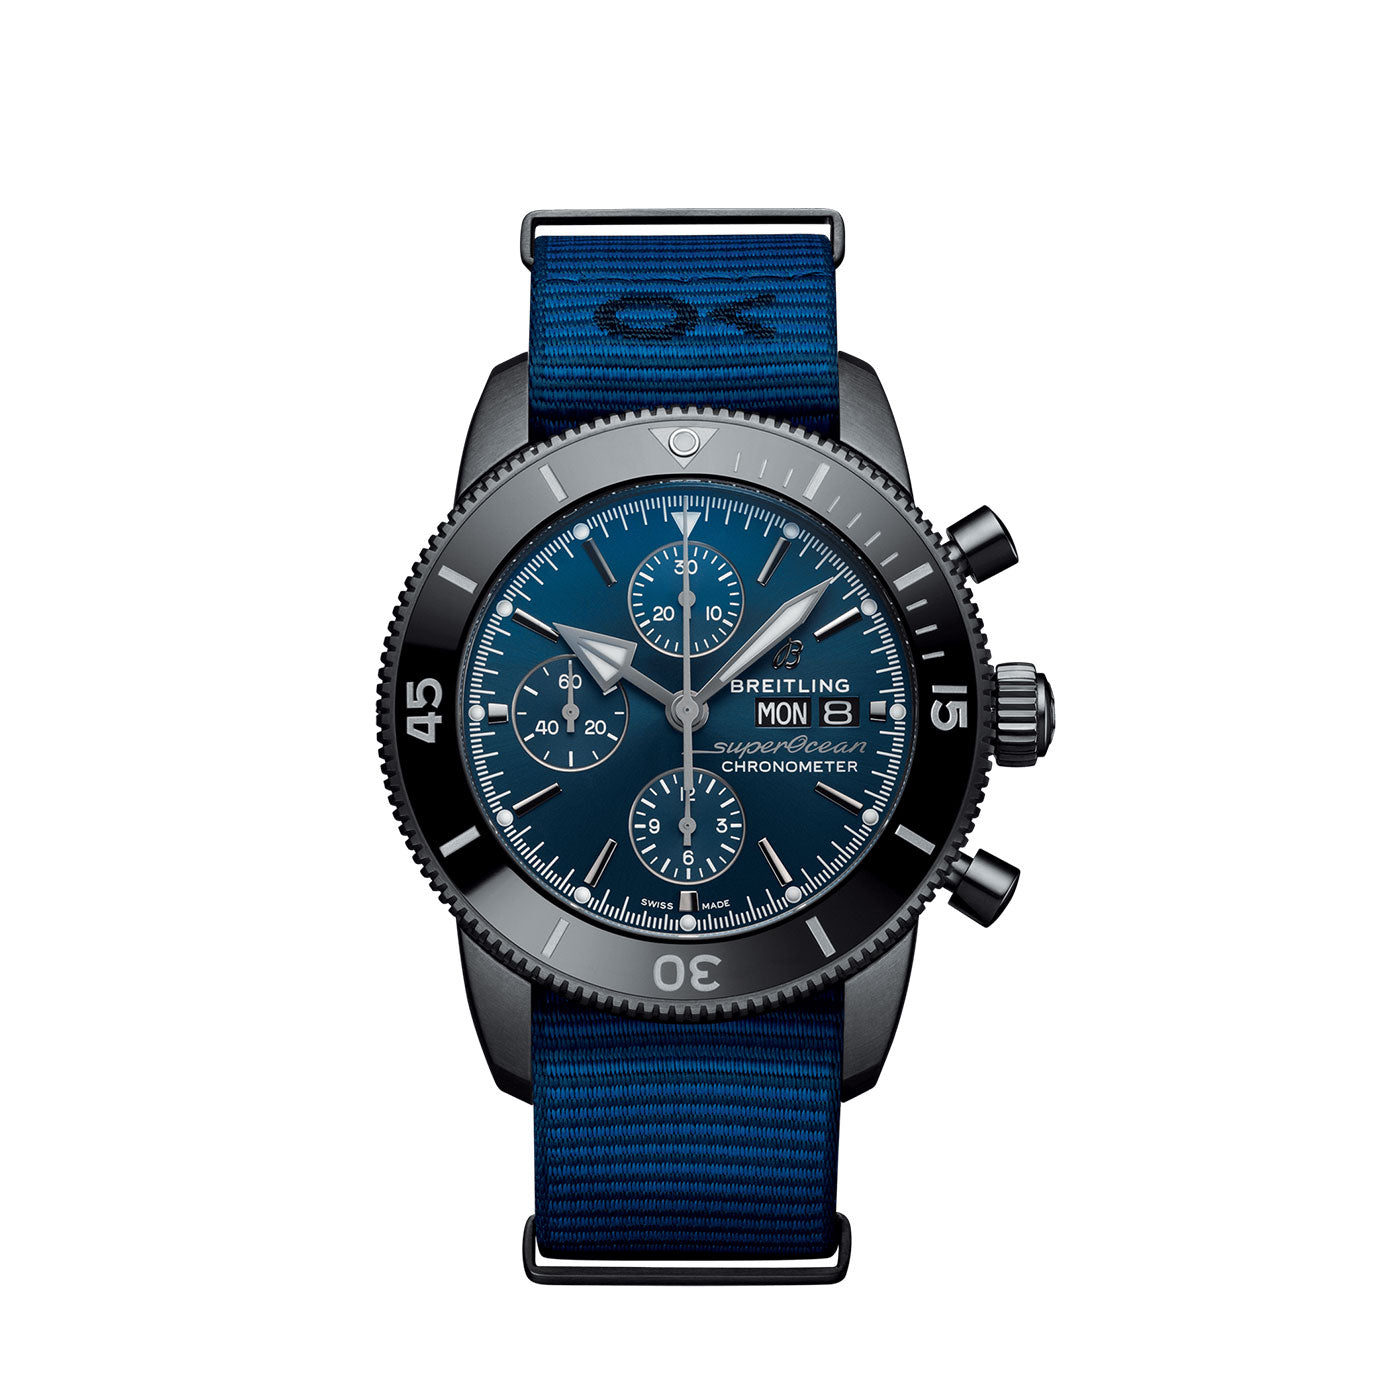 Breitling Superocean Heritage Chronograph 44 Outerknown DLC-Coated Stainless Steel Ref# M133132A1C1W1